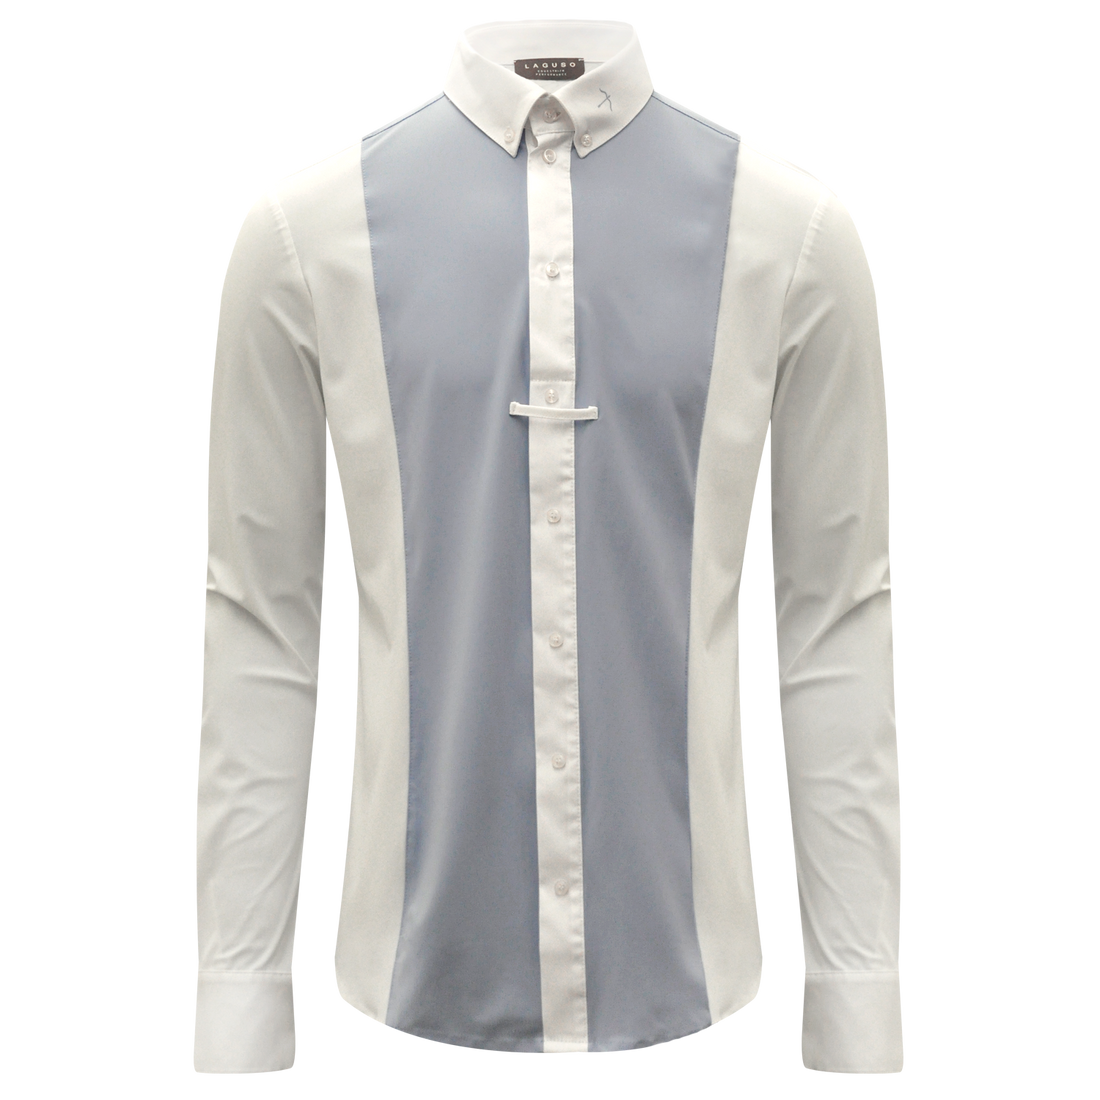 The stunning Laguso Max men’s Show shirt is made from a soft stretch jersey. The shirt has a white button cuff and placket front with a 1/2 opening so no pulling. The slimline blue panel at the front and back give this shirt a modern sporty look.  The Laguso logo on the button down collar. Tie holder at the front. 